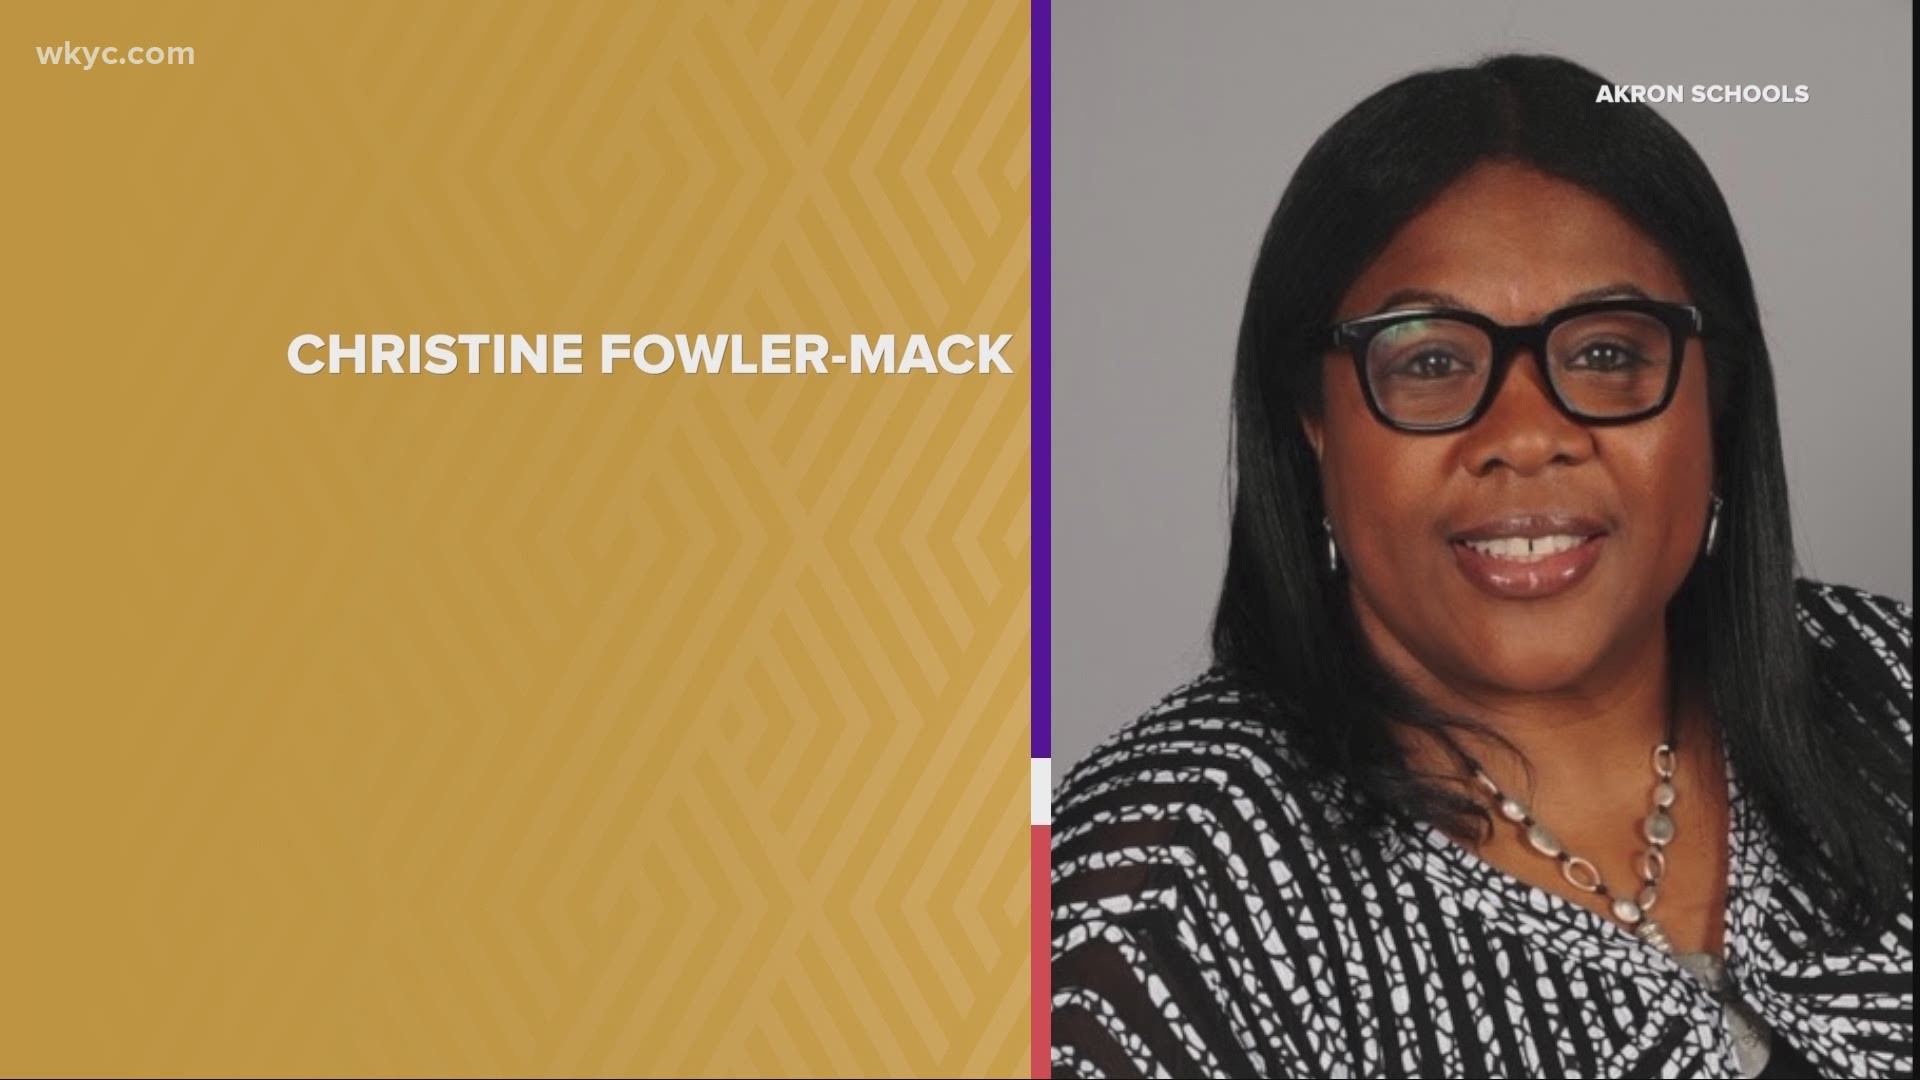 A graduate of East High School, Fowler-Mack has worked in education for over 20 years. She currently holds a top administrative position in the Cleveland district.